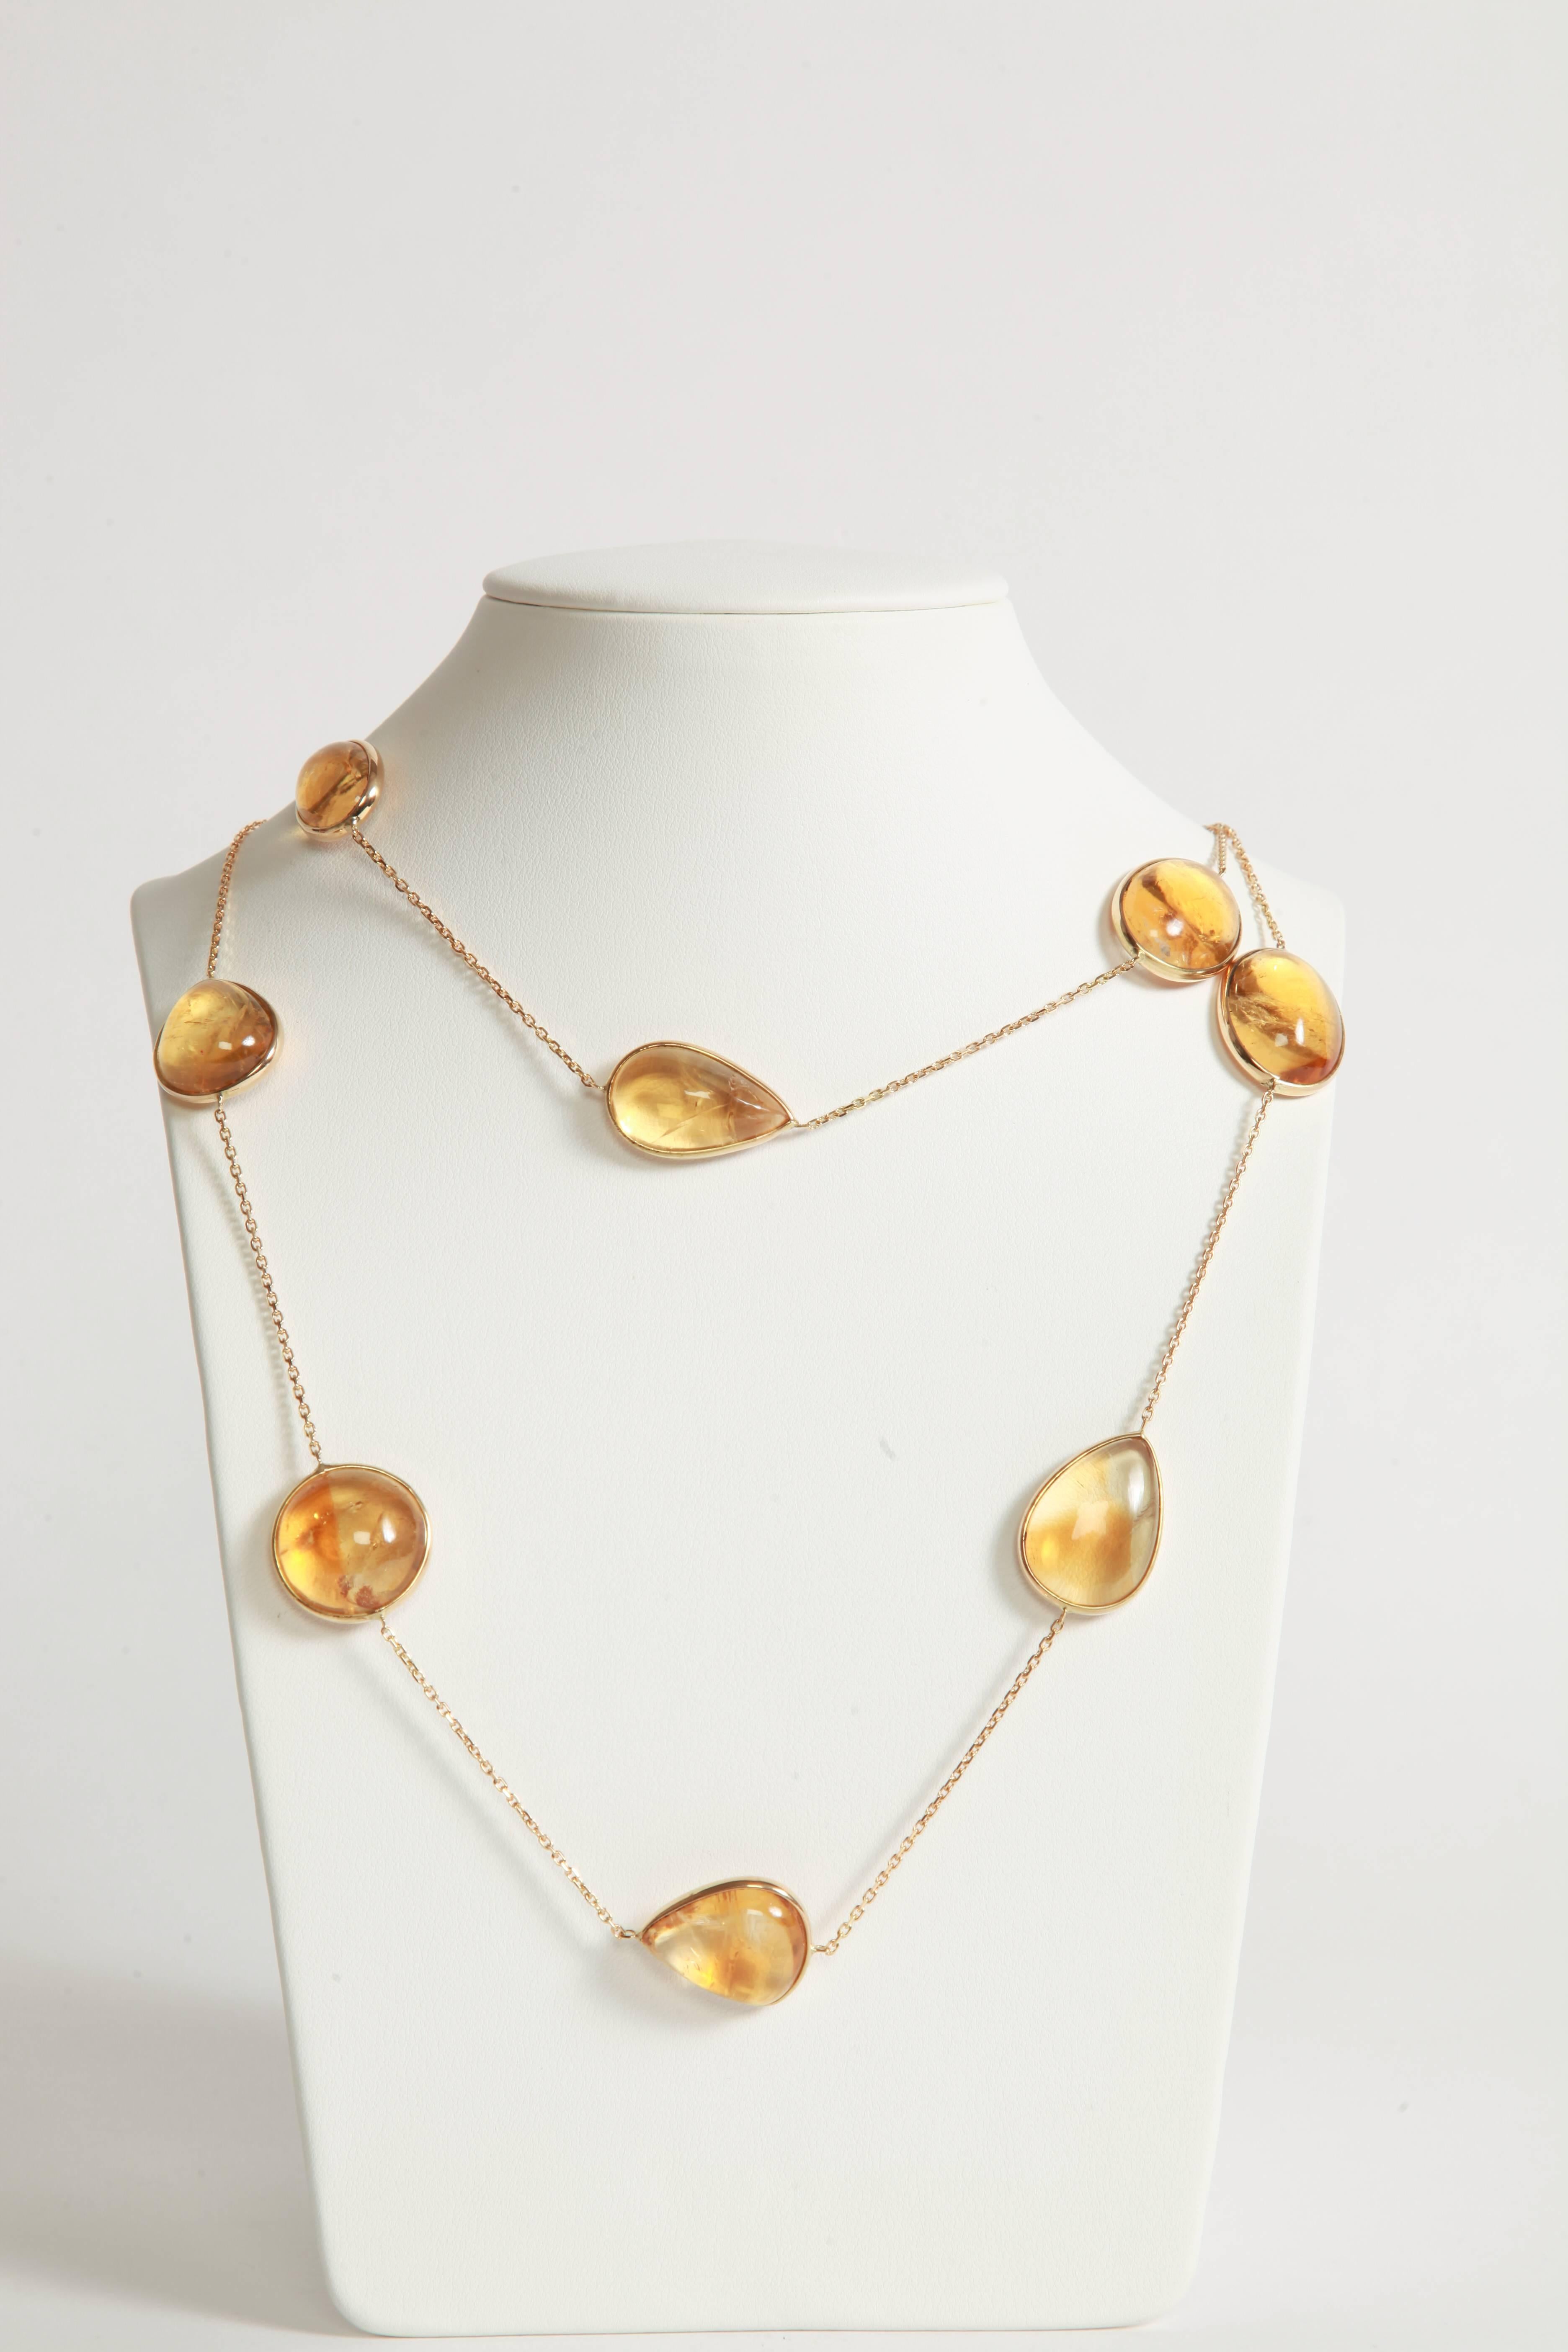 Honey colored necklace, 83.5cm long.
Twelve citrine cabochons weight: 193.74carats on a 18K yellow gold chain.
Total weight: 47.82 grams
Created by Marion Jeantet, French assay mark
Price without local taxes
